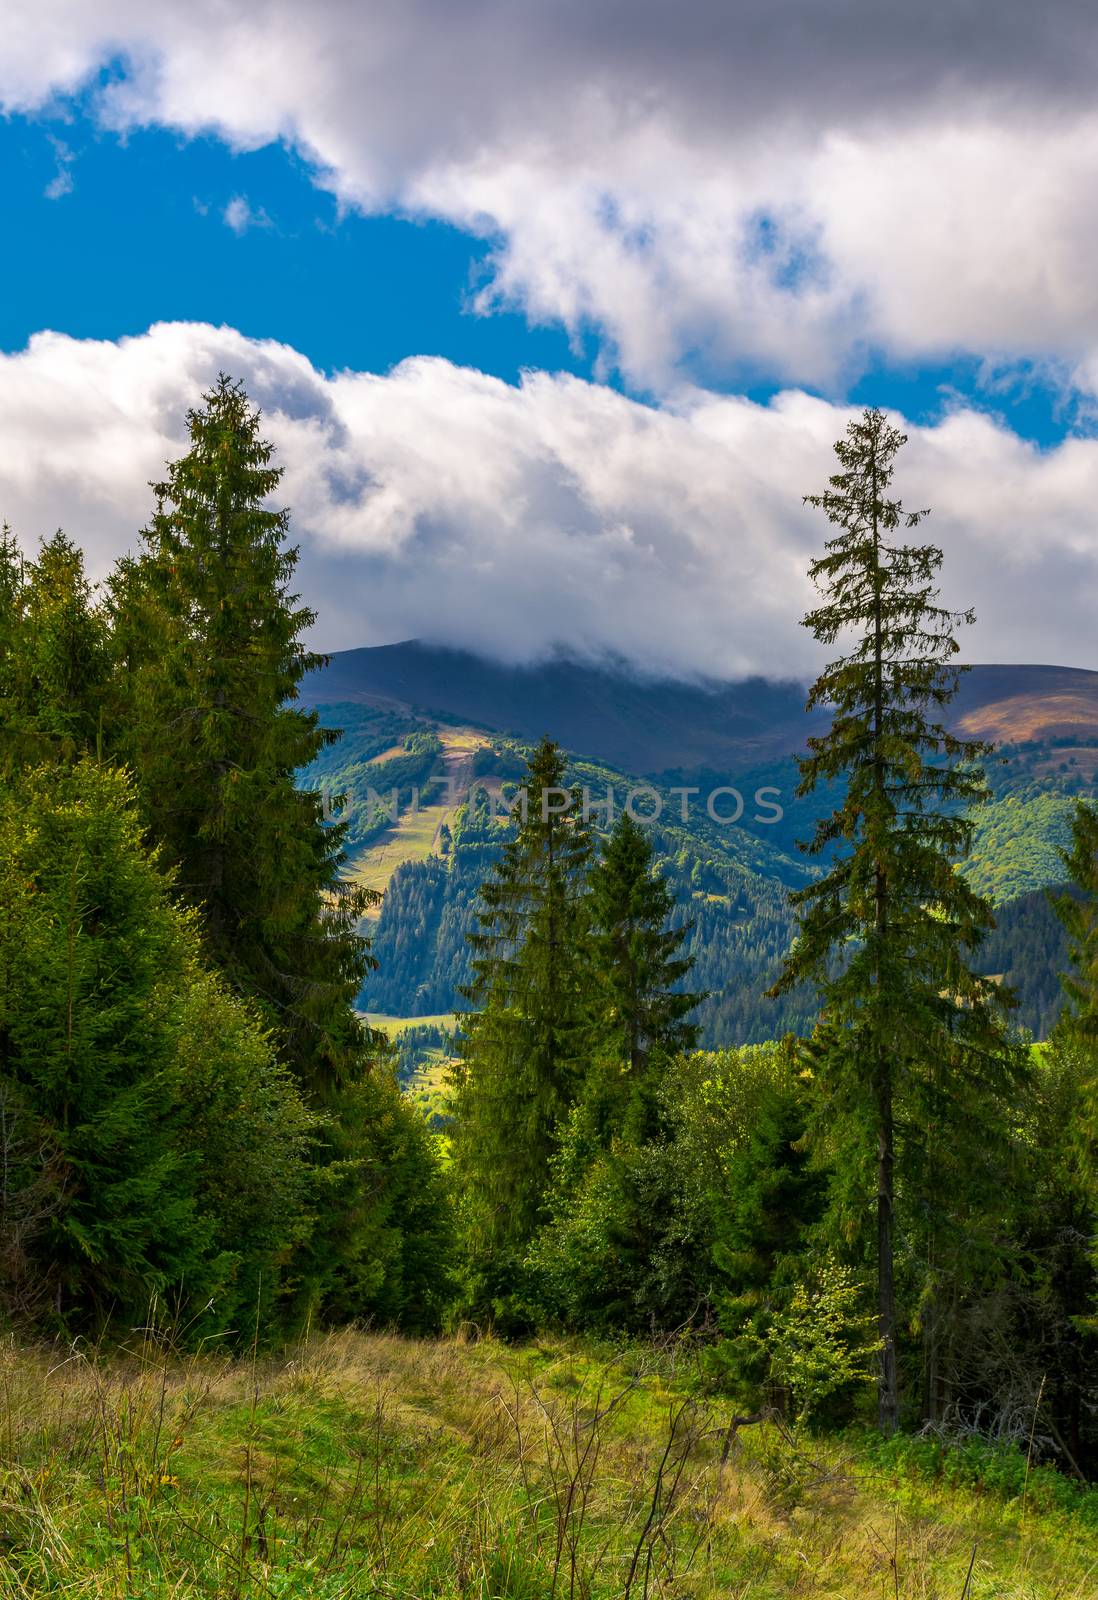 forested hills of Carpathian mountains. beautiful scenery on a cloudy day